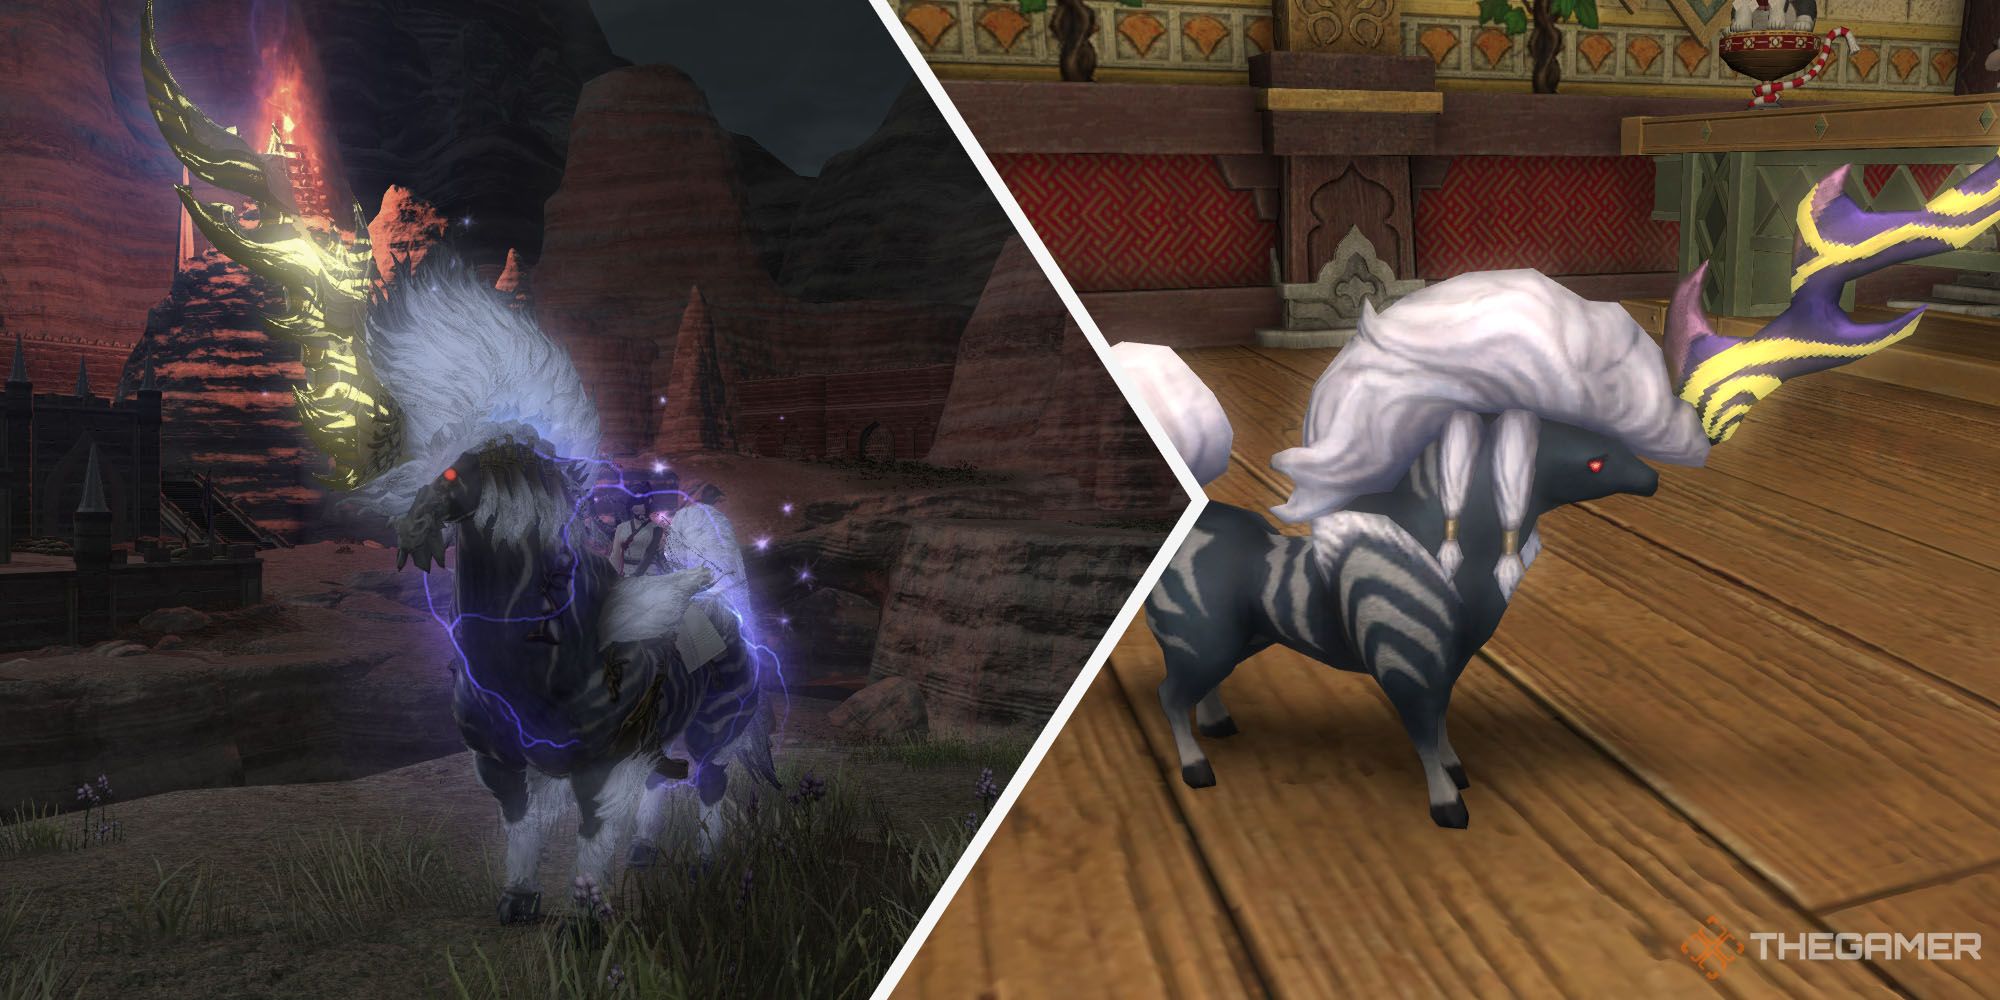 How To Get The Ixion Mount And Minion In FFXIV